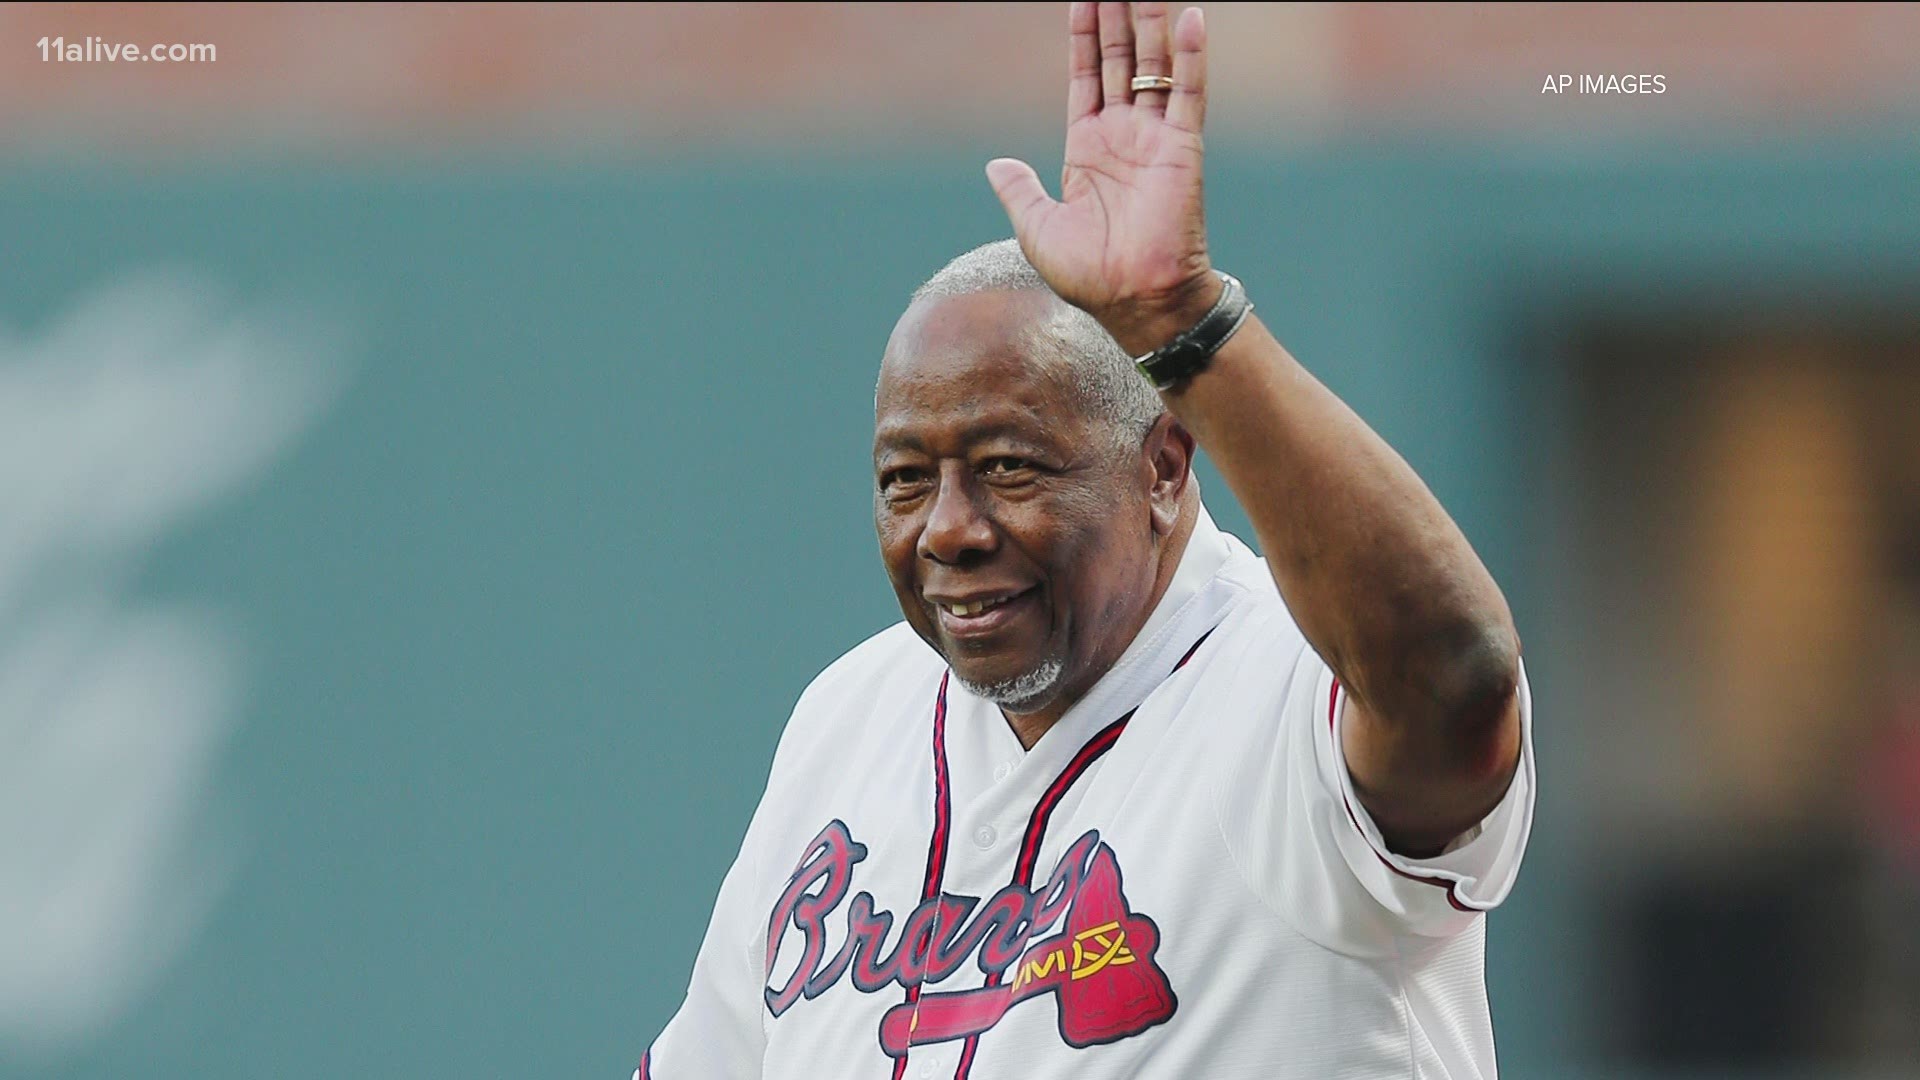 The baseball great and one-time home run king died. The Atlanta Braves said he died peacefully in his sleep early Friday. No cause was given. He was 86.